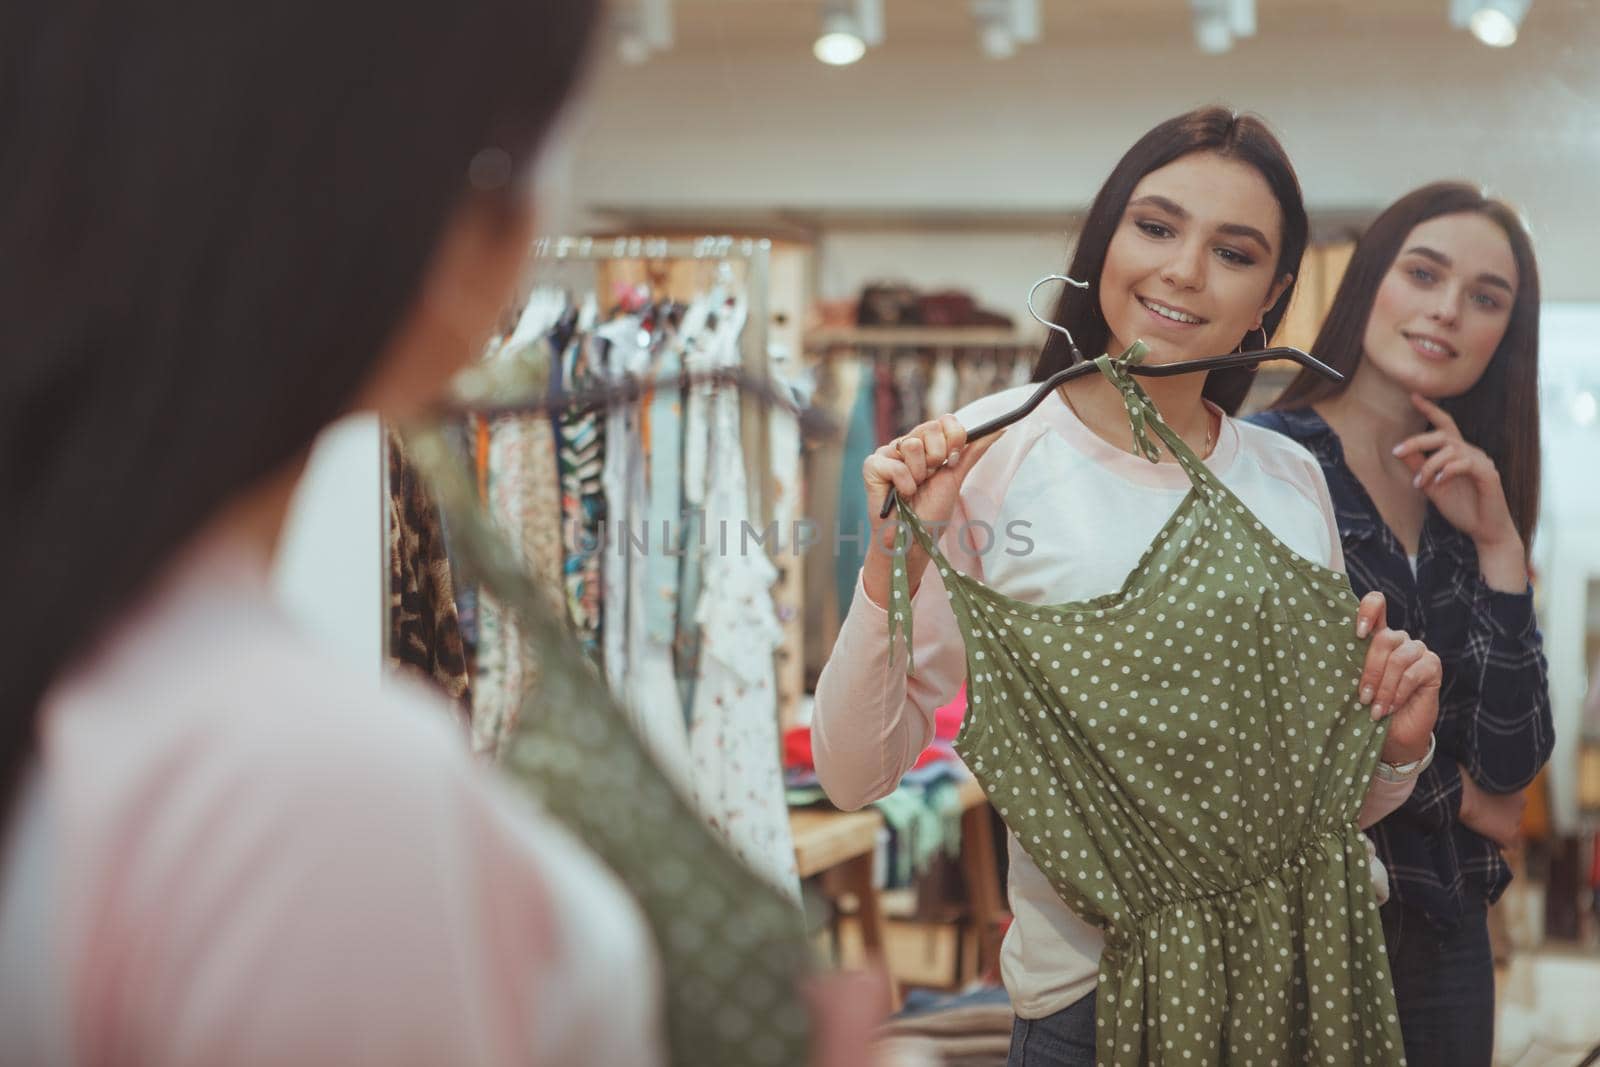 Charming female friends having fun choosing new dress to buy at clothing store. Beautiful woman trying on new dress while shopping with her friend. Friendship, lifestyle, teenagers concept